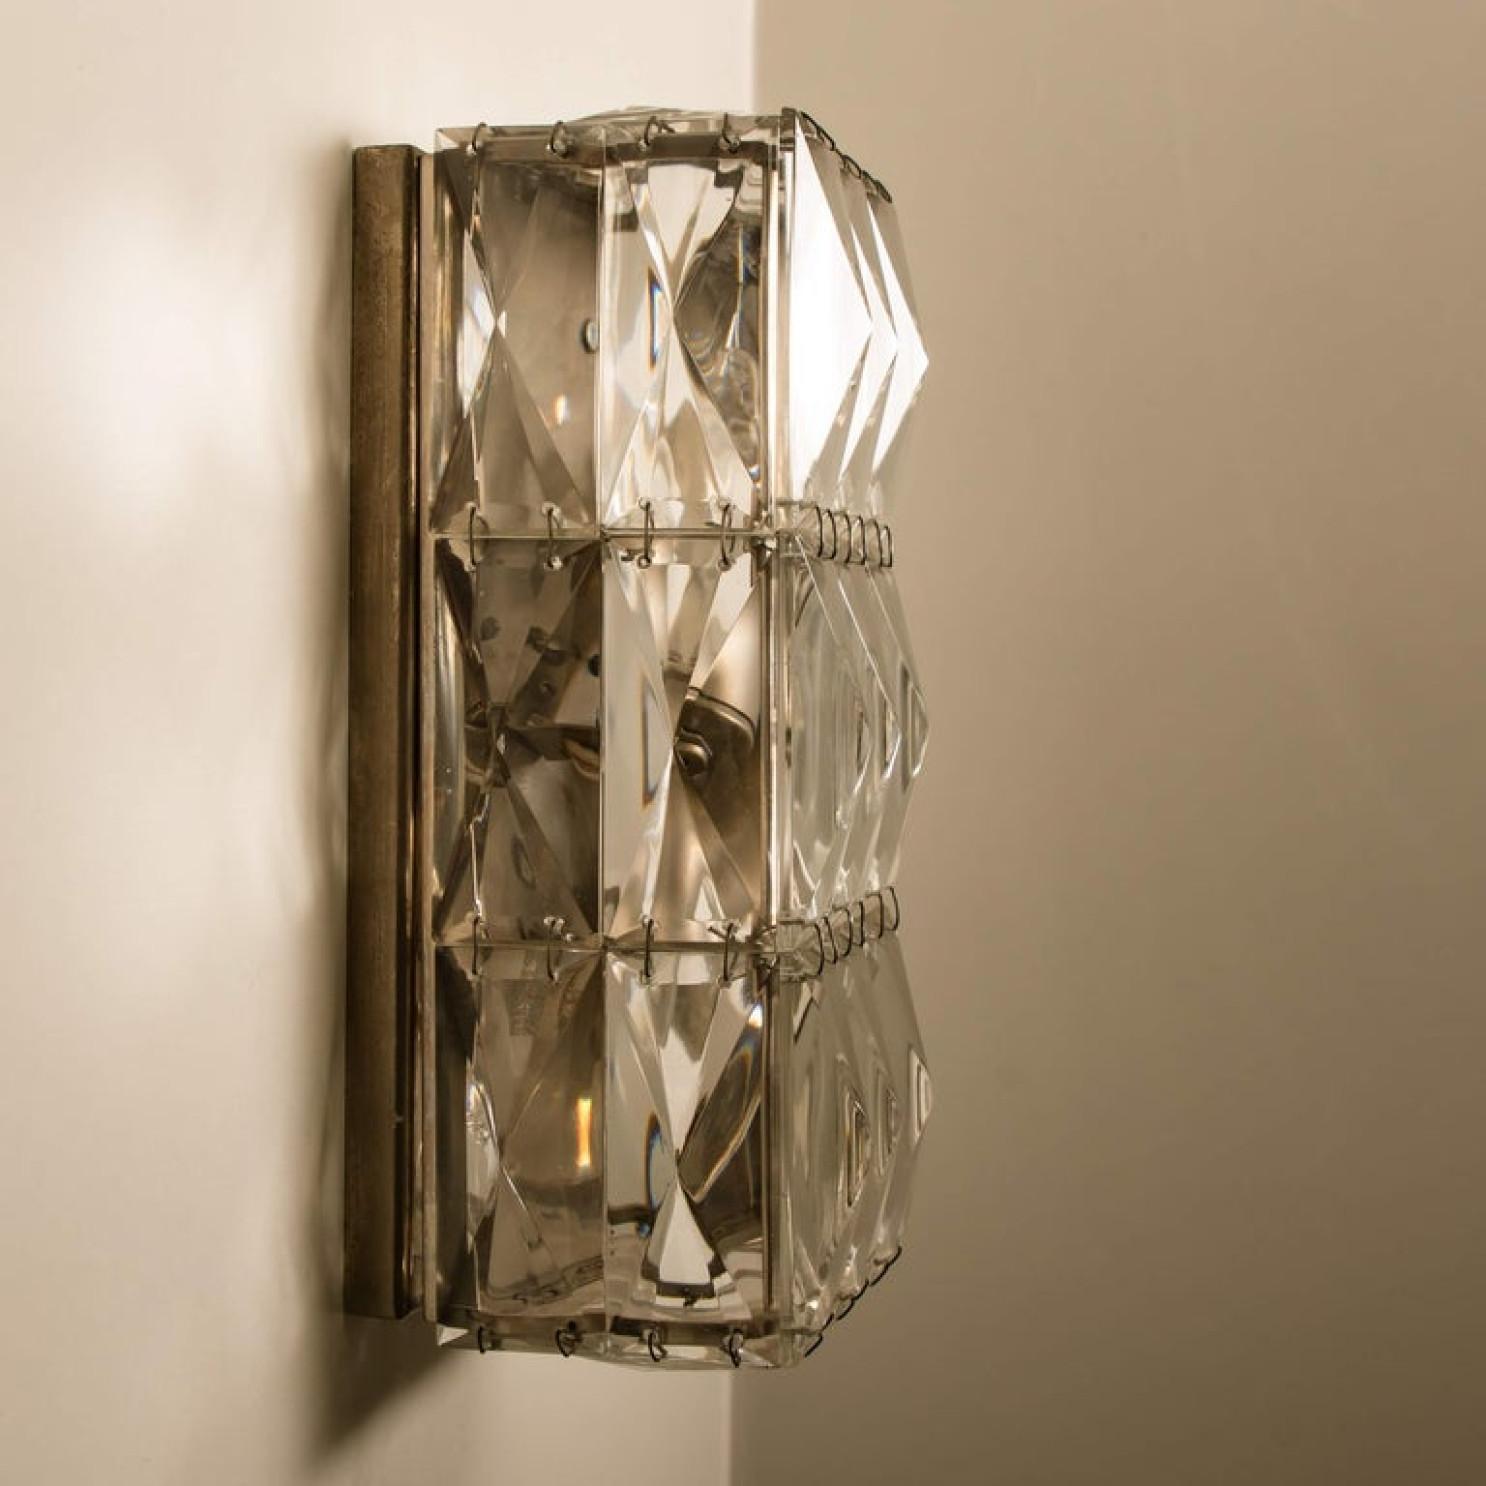 Pair of Palwa Wall Light Fixtures, Chrome-Plated Crystal Glass, 1970 For Sale 6